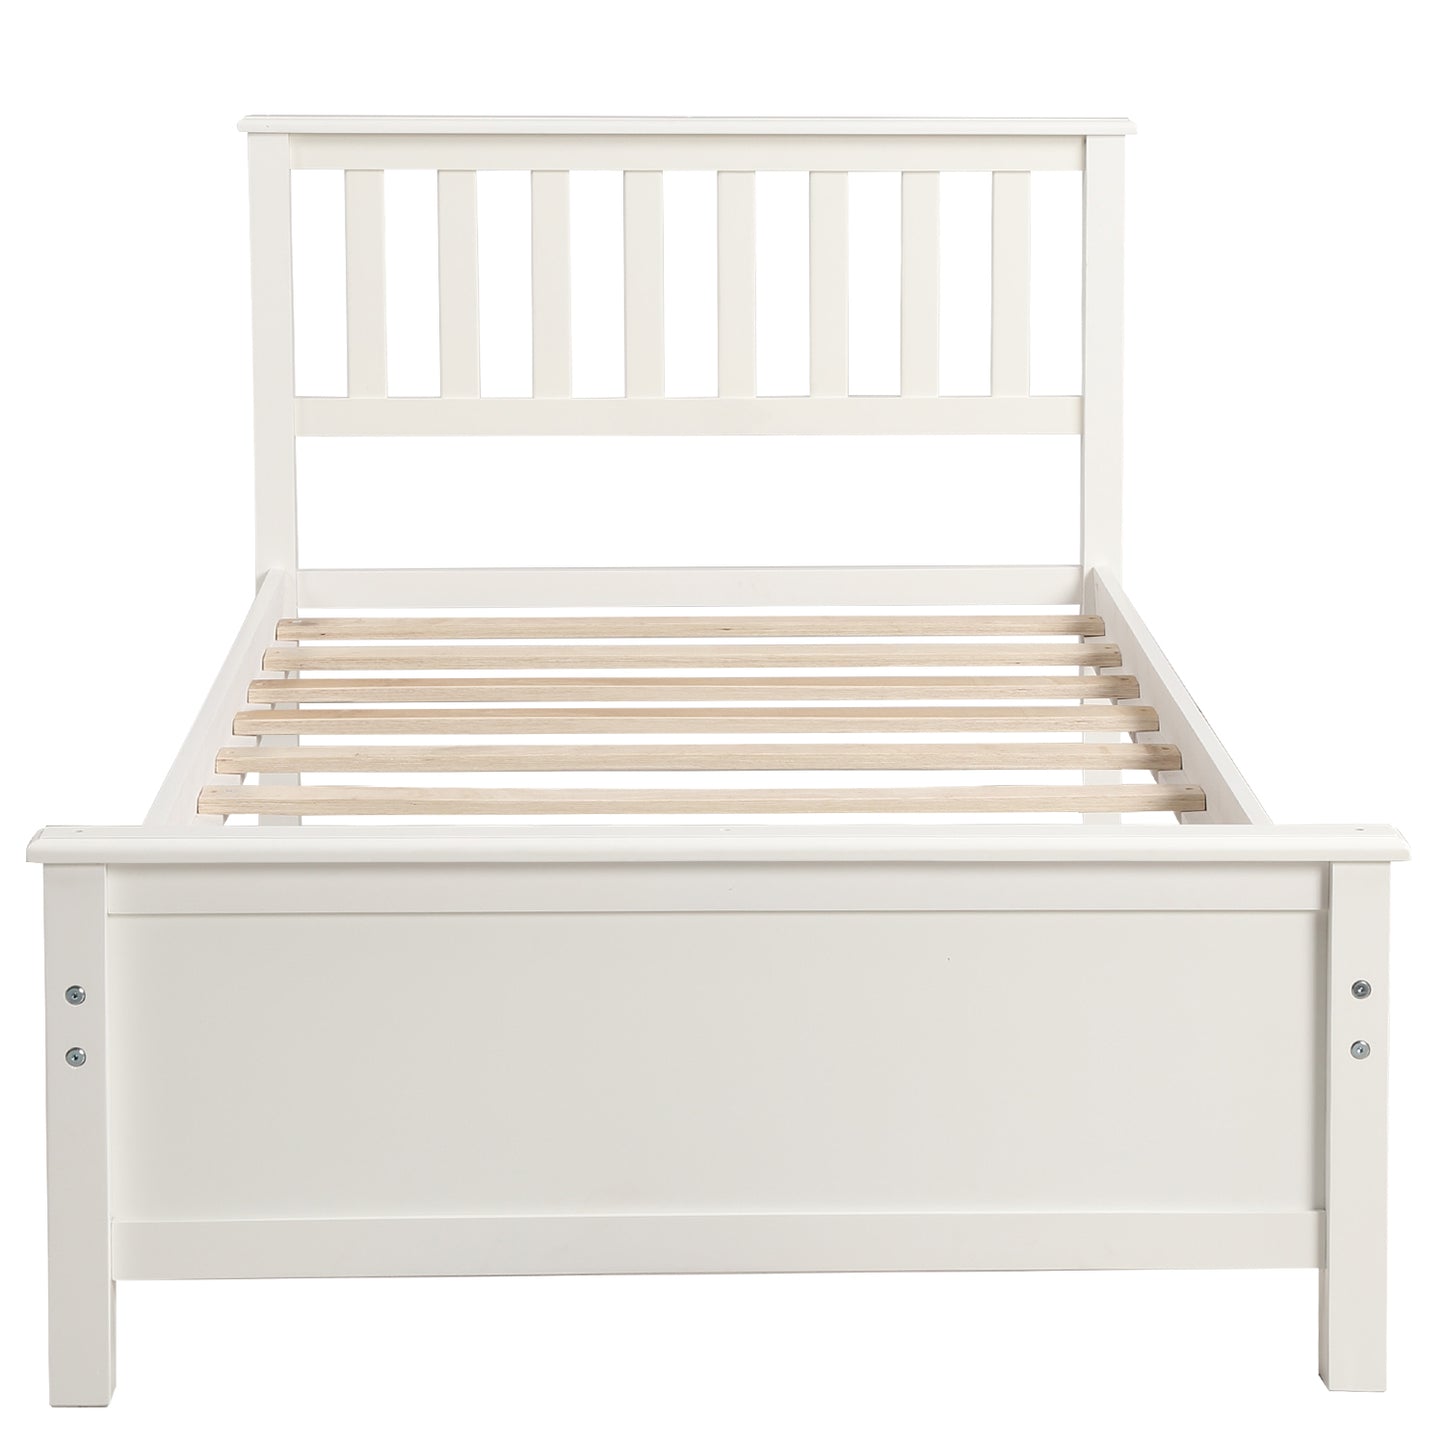 SYNGAR Solid Wood Twin Bed Frame with Headboard and Footboard, White